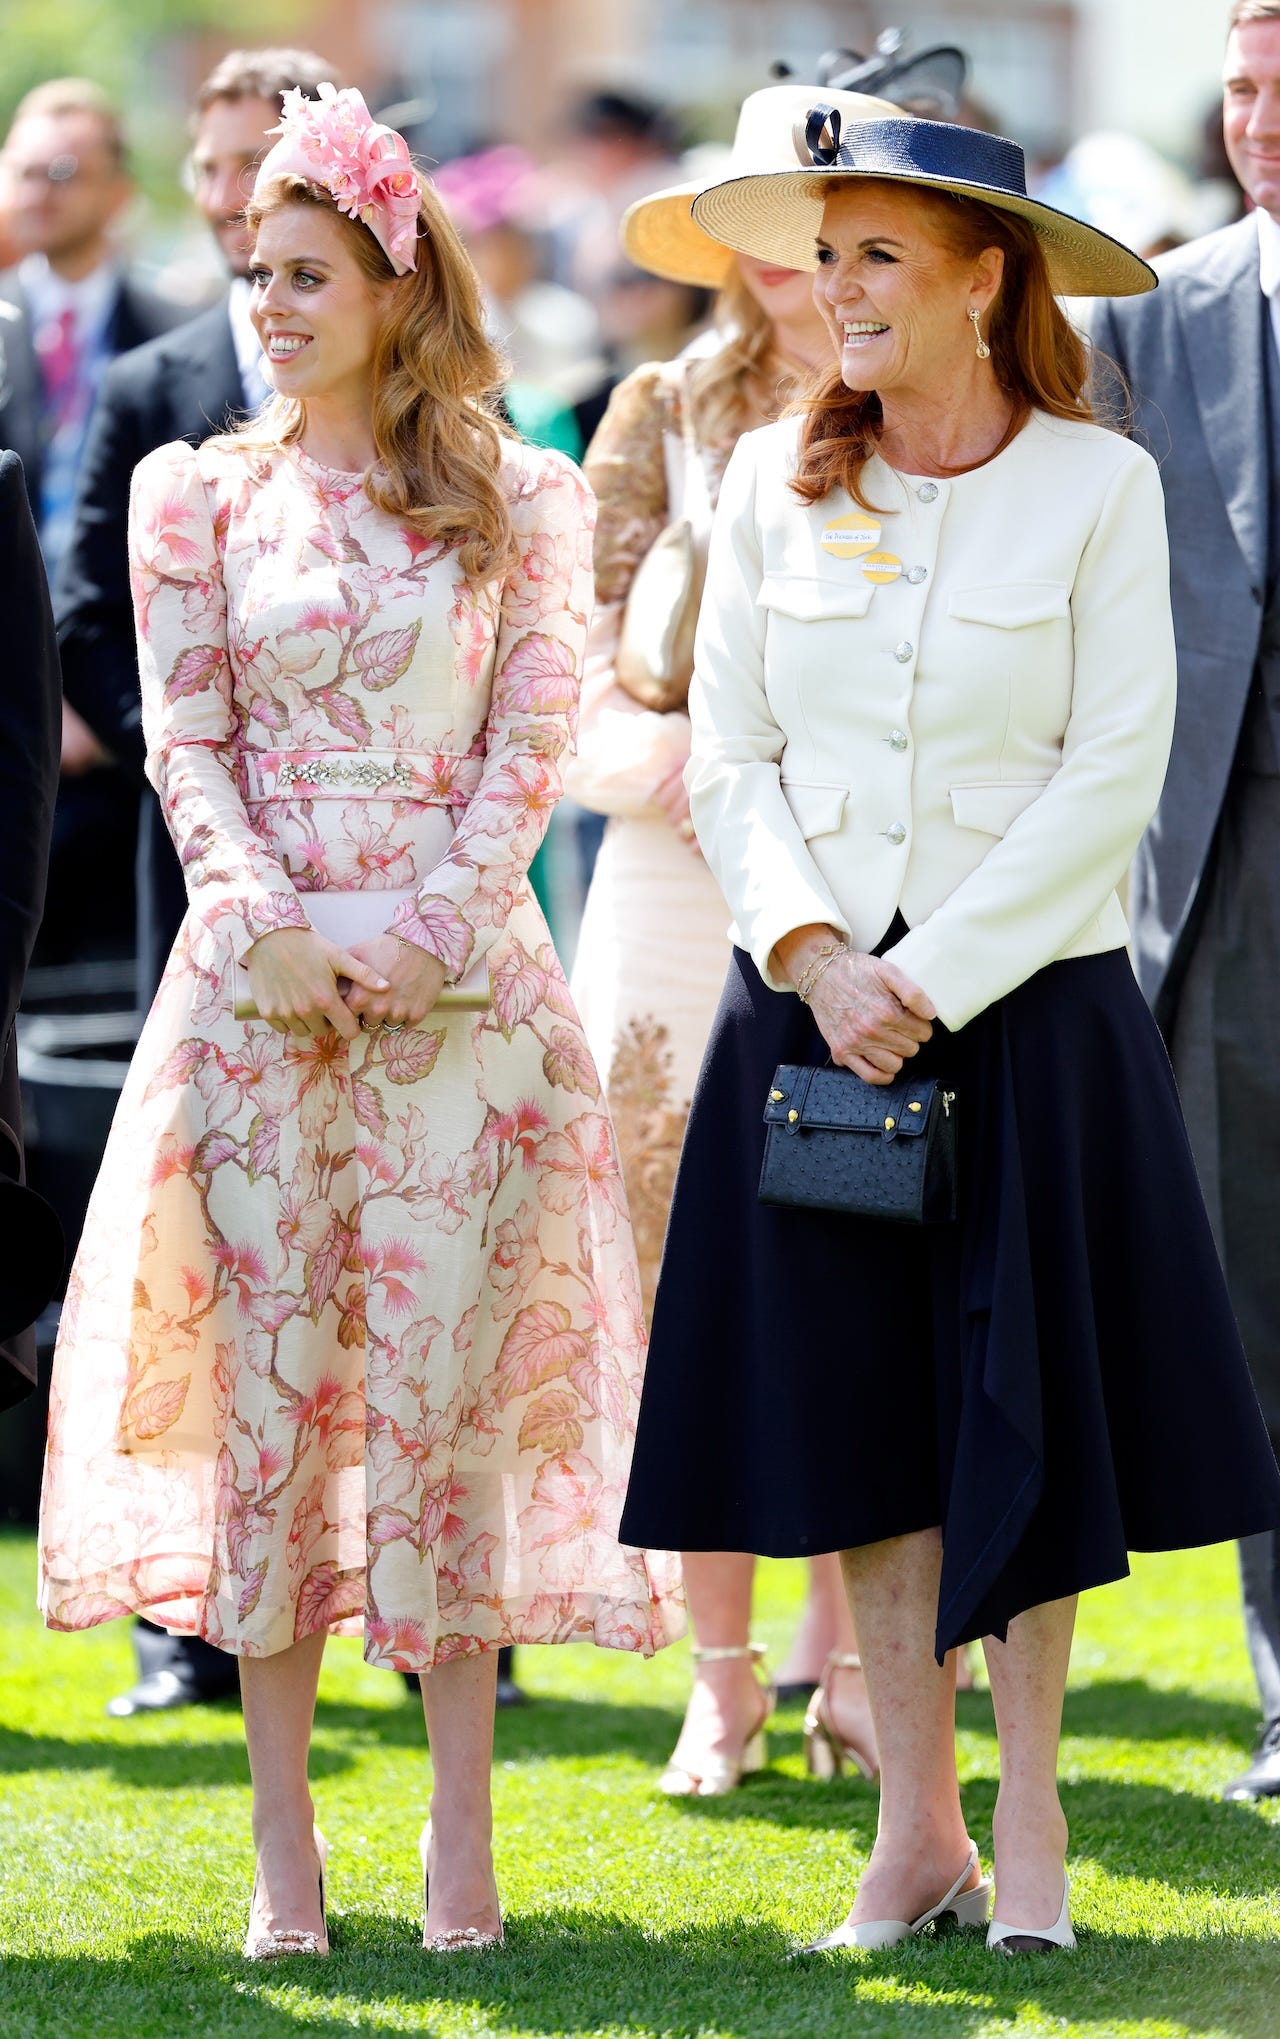 <p>Beatrice, 35, arrived at Royal Ascot on day two in an elaborate <a href="https://www.zimmermann.com/us/matchmaker-floral-midi-dress-coral-hibiscus.html">Zimmermann</a> midi dress, dubbed the "Matchmaker." The botanical-printed dress retails for $1,090.</p><p>The lightweight, long-sleeved gown, made from silk organza, featured a diamanté-decorated belt. The princess paired it with a gold clutch and a pink headband with floral pieces designed by Juliette Millinery, <a href="https://wwd.com/pop-culture/celebrity-news/princess-eugenie-dress-beatrice-sarah-ferguson-royal-ascot-1236454367/">WWD reported</a>.</p><p>Beatrice was photographed alongside her mother, the Duchess of York, who wore a navy skirt with a white buttoned-up Veronica Beard blazer.</p>